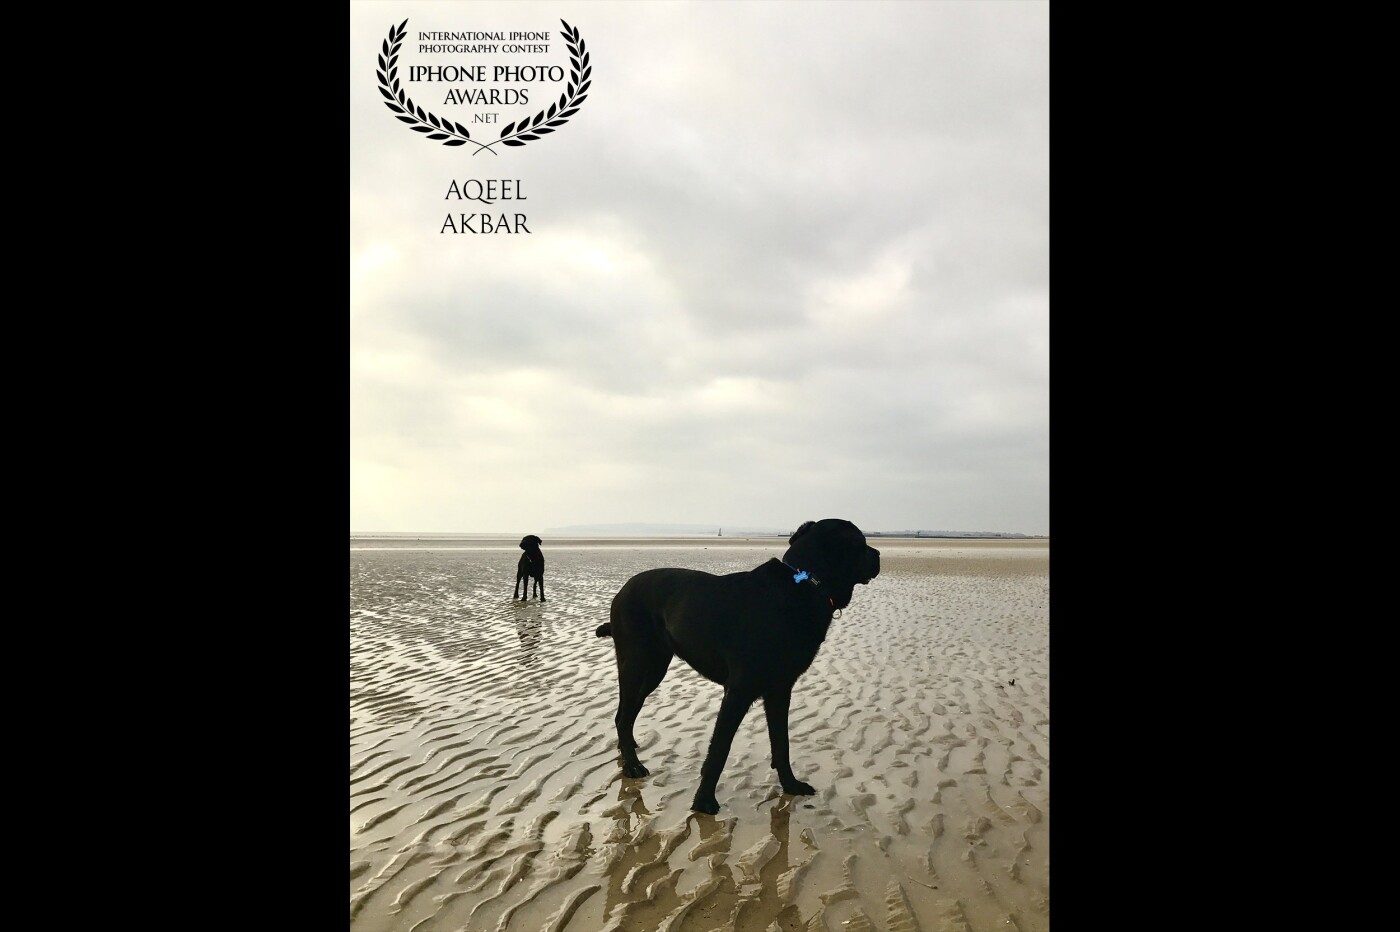 If it wasn’t for these two 4 legged beings along with my two sisters, nephew and mother - I wouldn’t be standing here today. They keep me grounded, focused and entertained. This was shot in Camber Sands, Kent and it resonates me with me... like the Desert misses the rain. It has this melancholy to it.